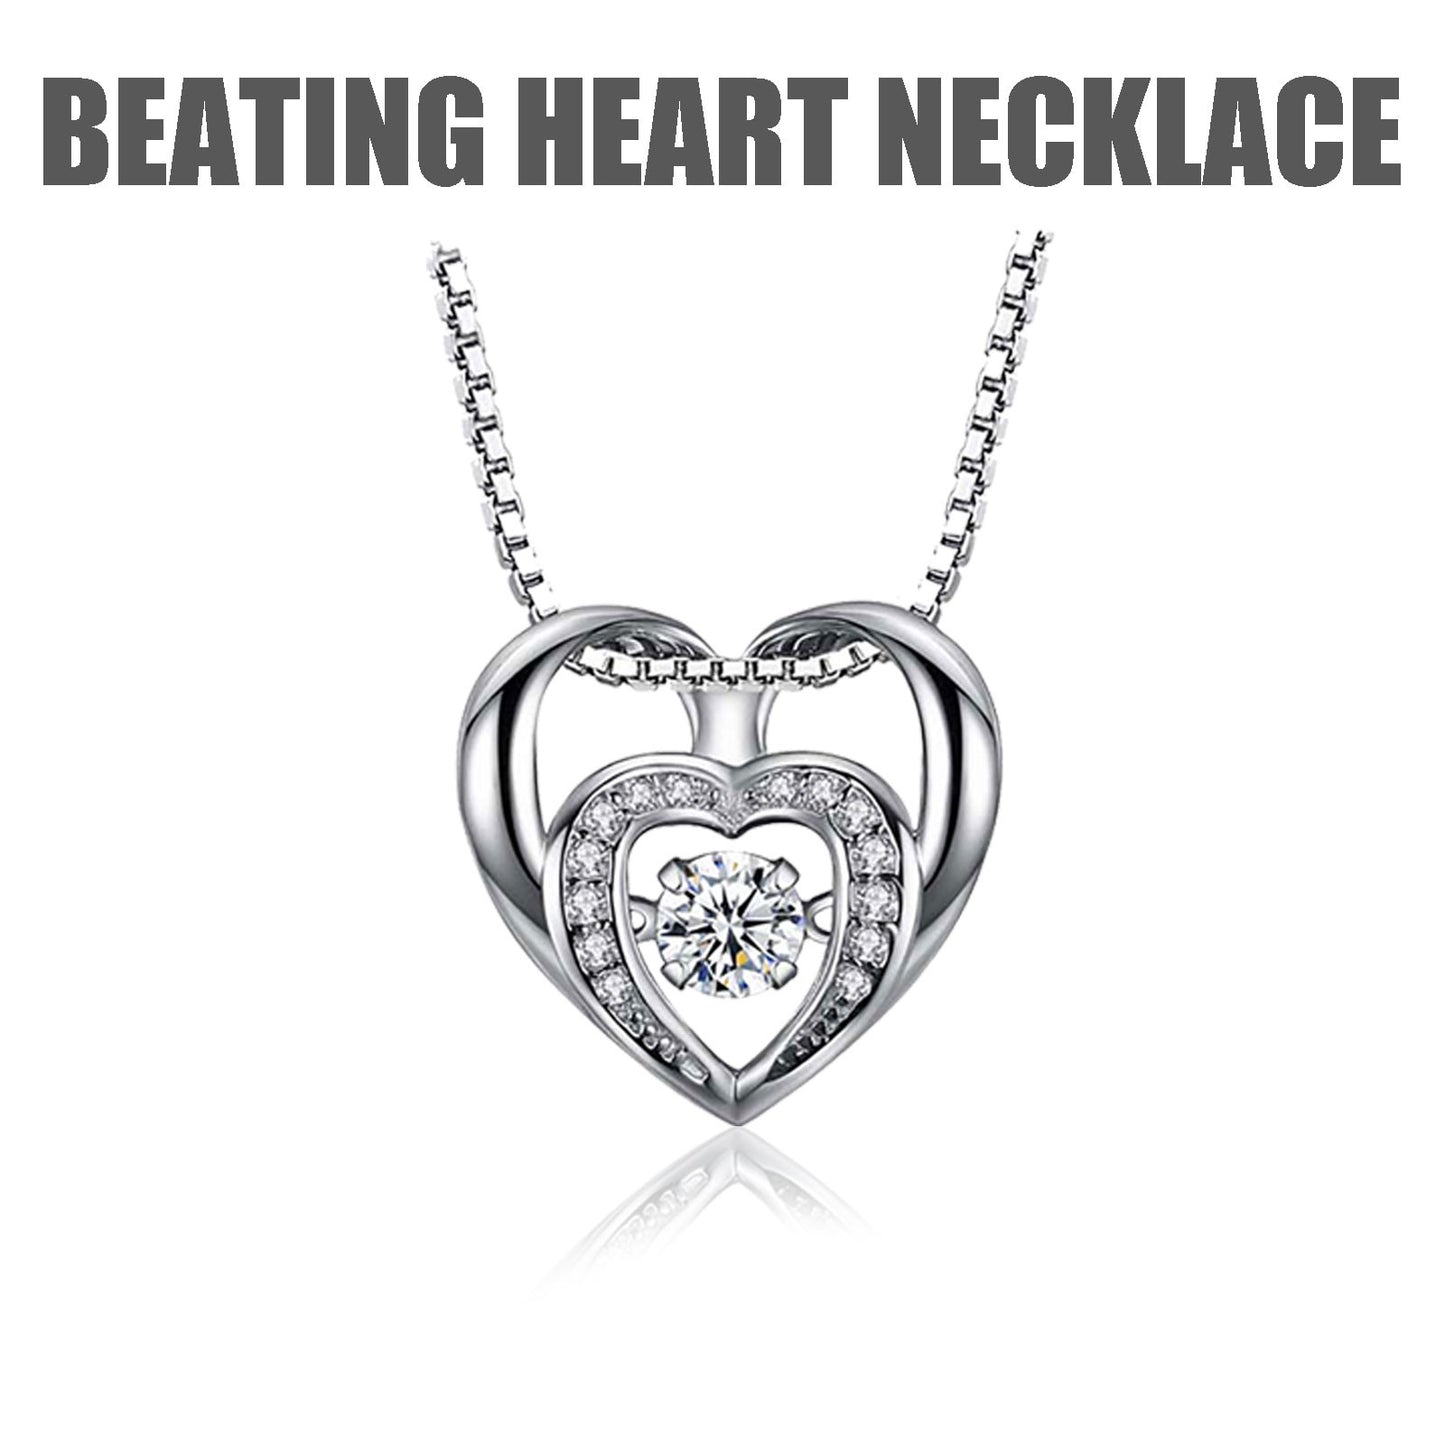 The New Valentine's Day Heartbeat Necklace